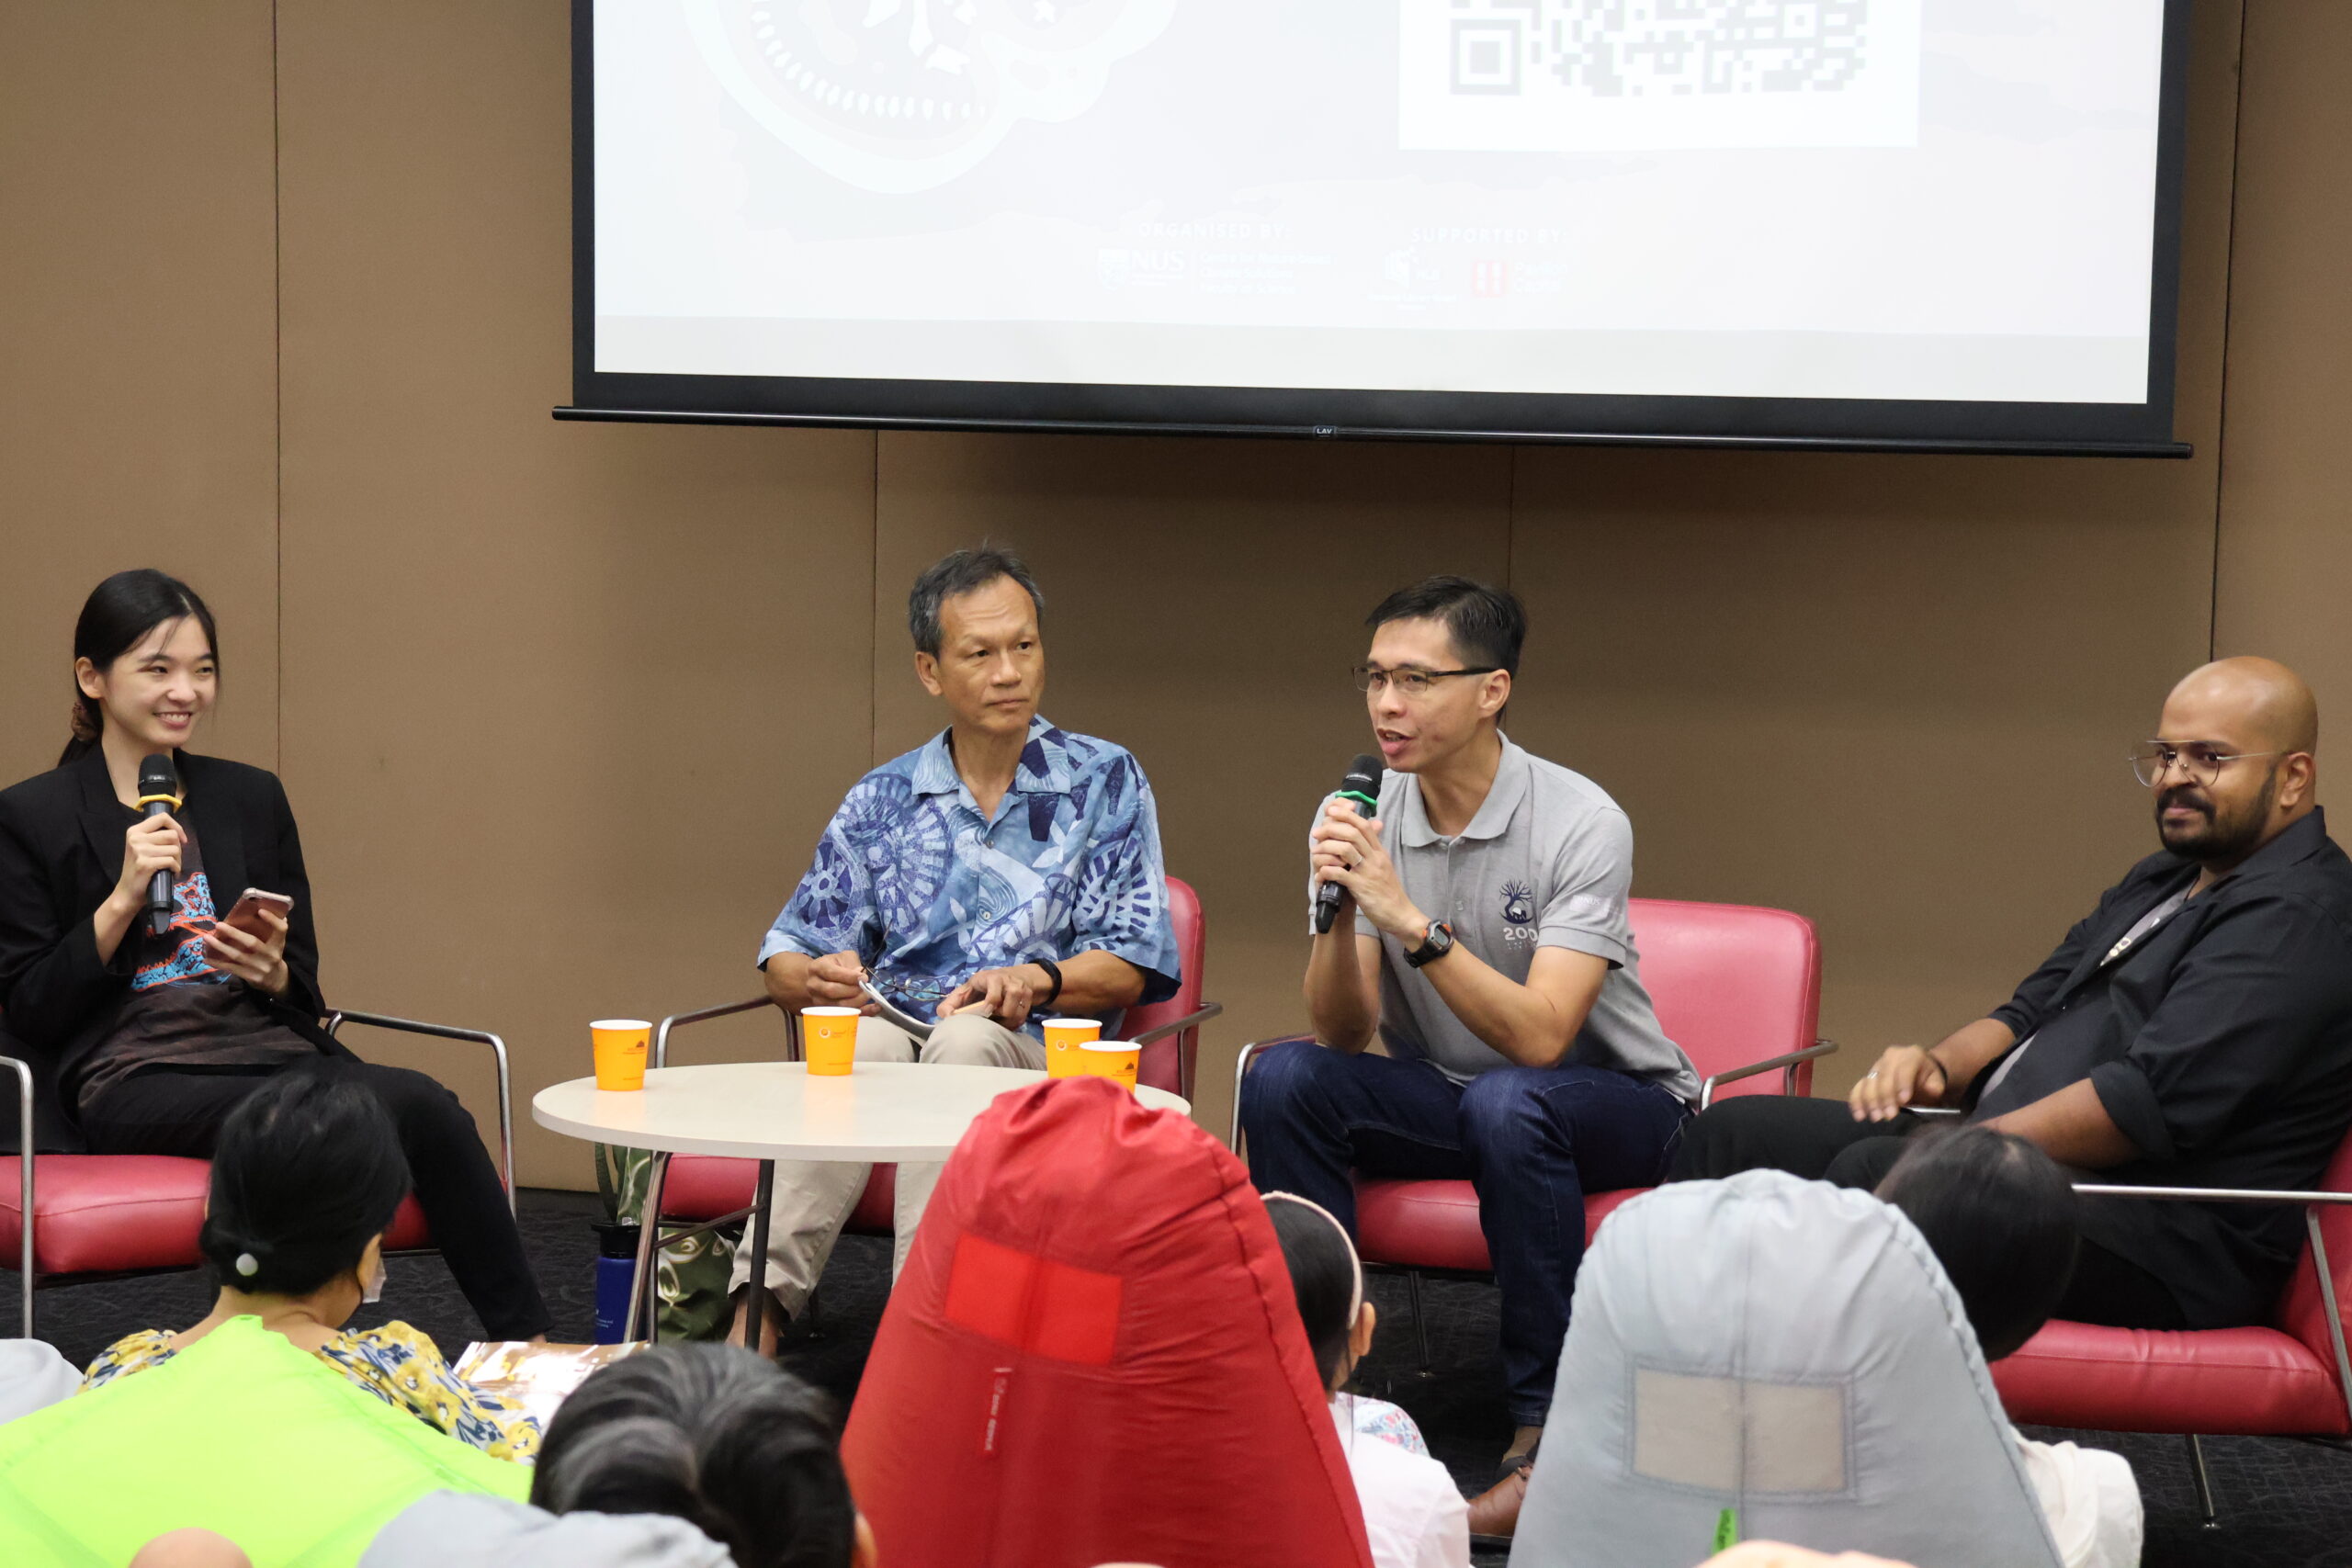 (From left) Miss Annabel Lim, Dr Shawn Lum, Associate Professor Darren Yeo, Mr Kannan Raja, at a panel discussion after the screening of Jurassic Park.
